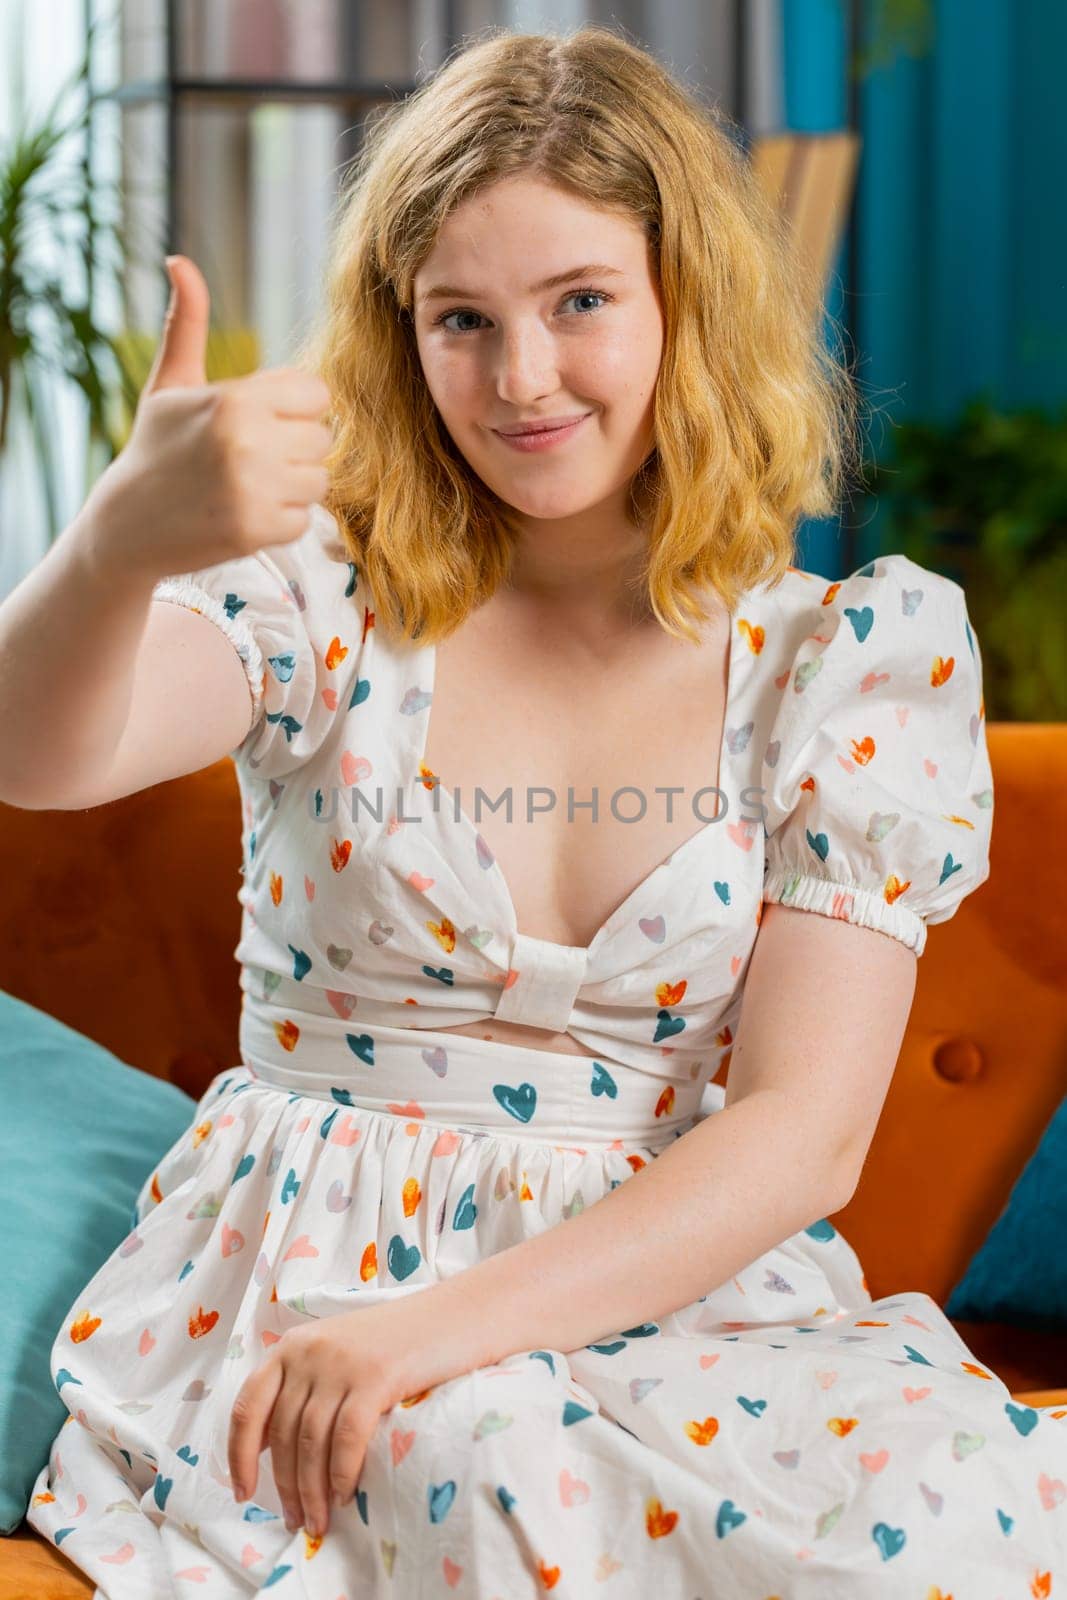 Like. Happy excited redhead woman looking approvingly at camera showing thumbs up, like sign positive something, good great news, positive feedback. Young girl sitting on couch at home room. Vertical